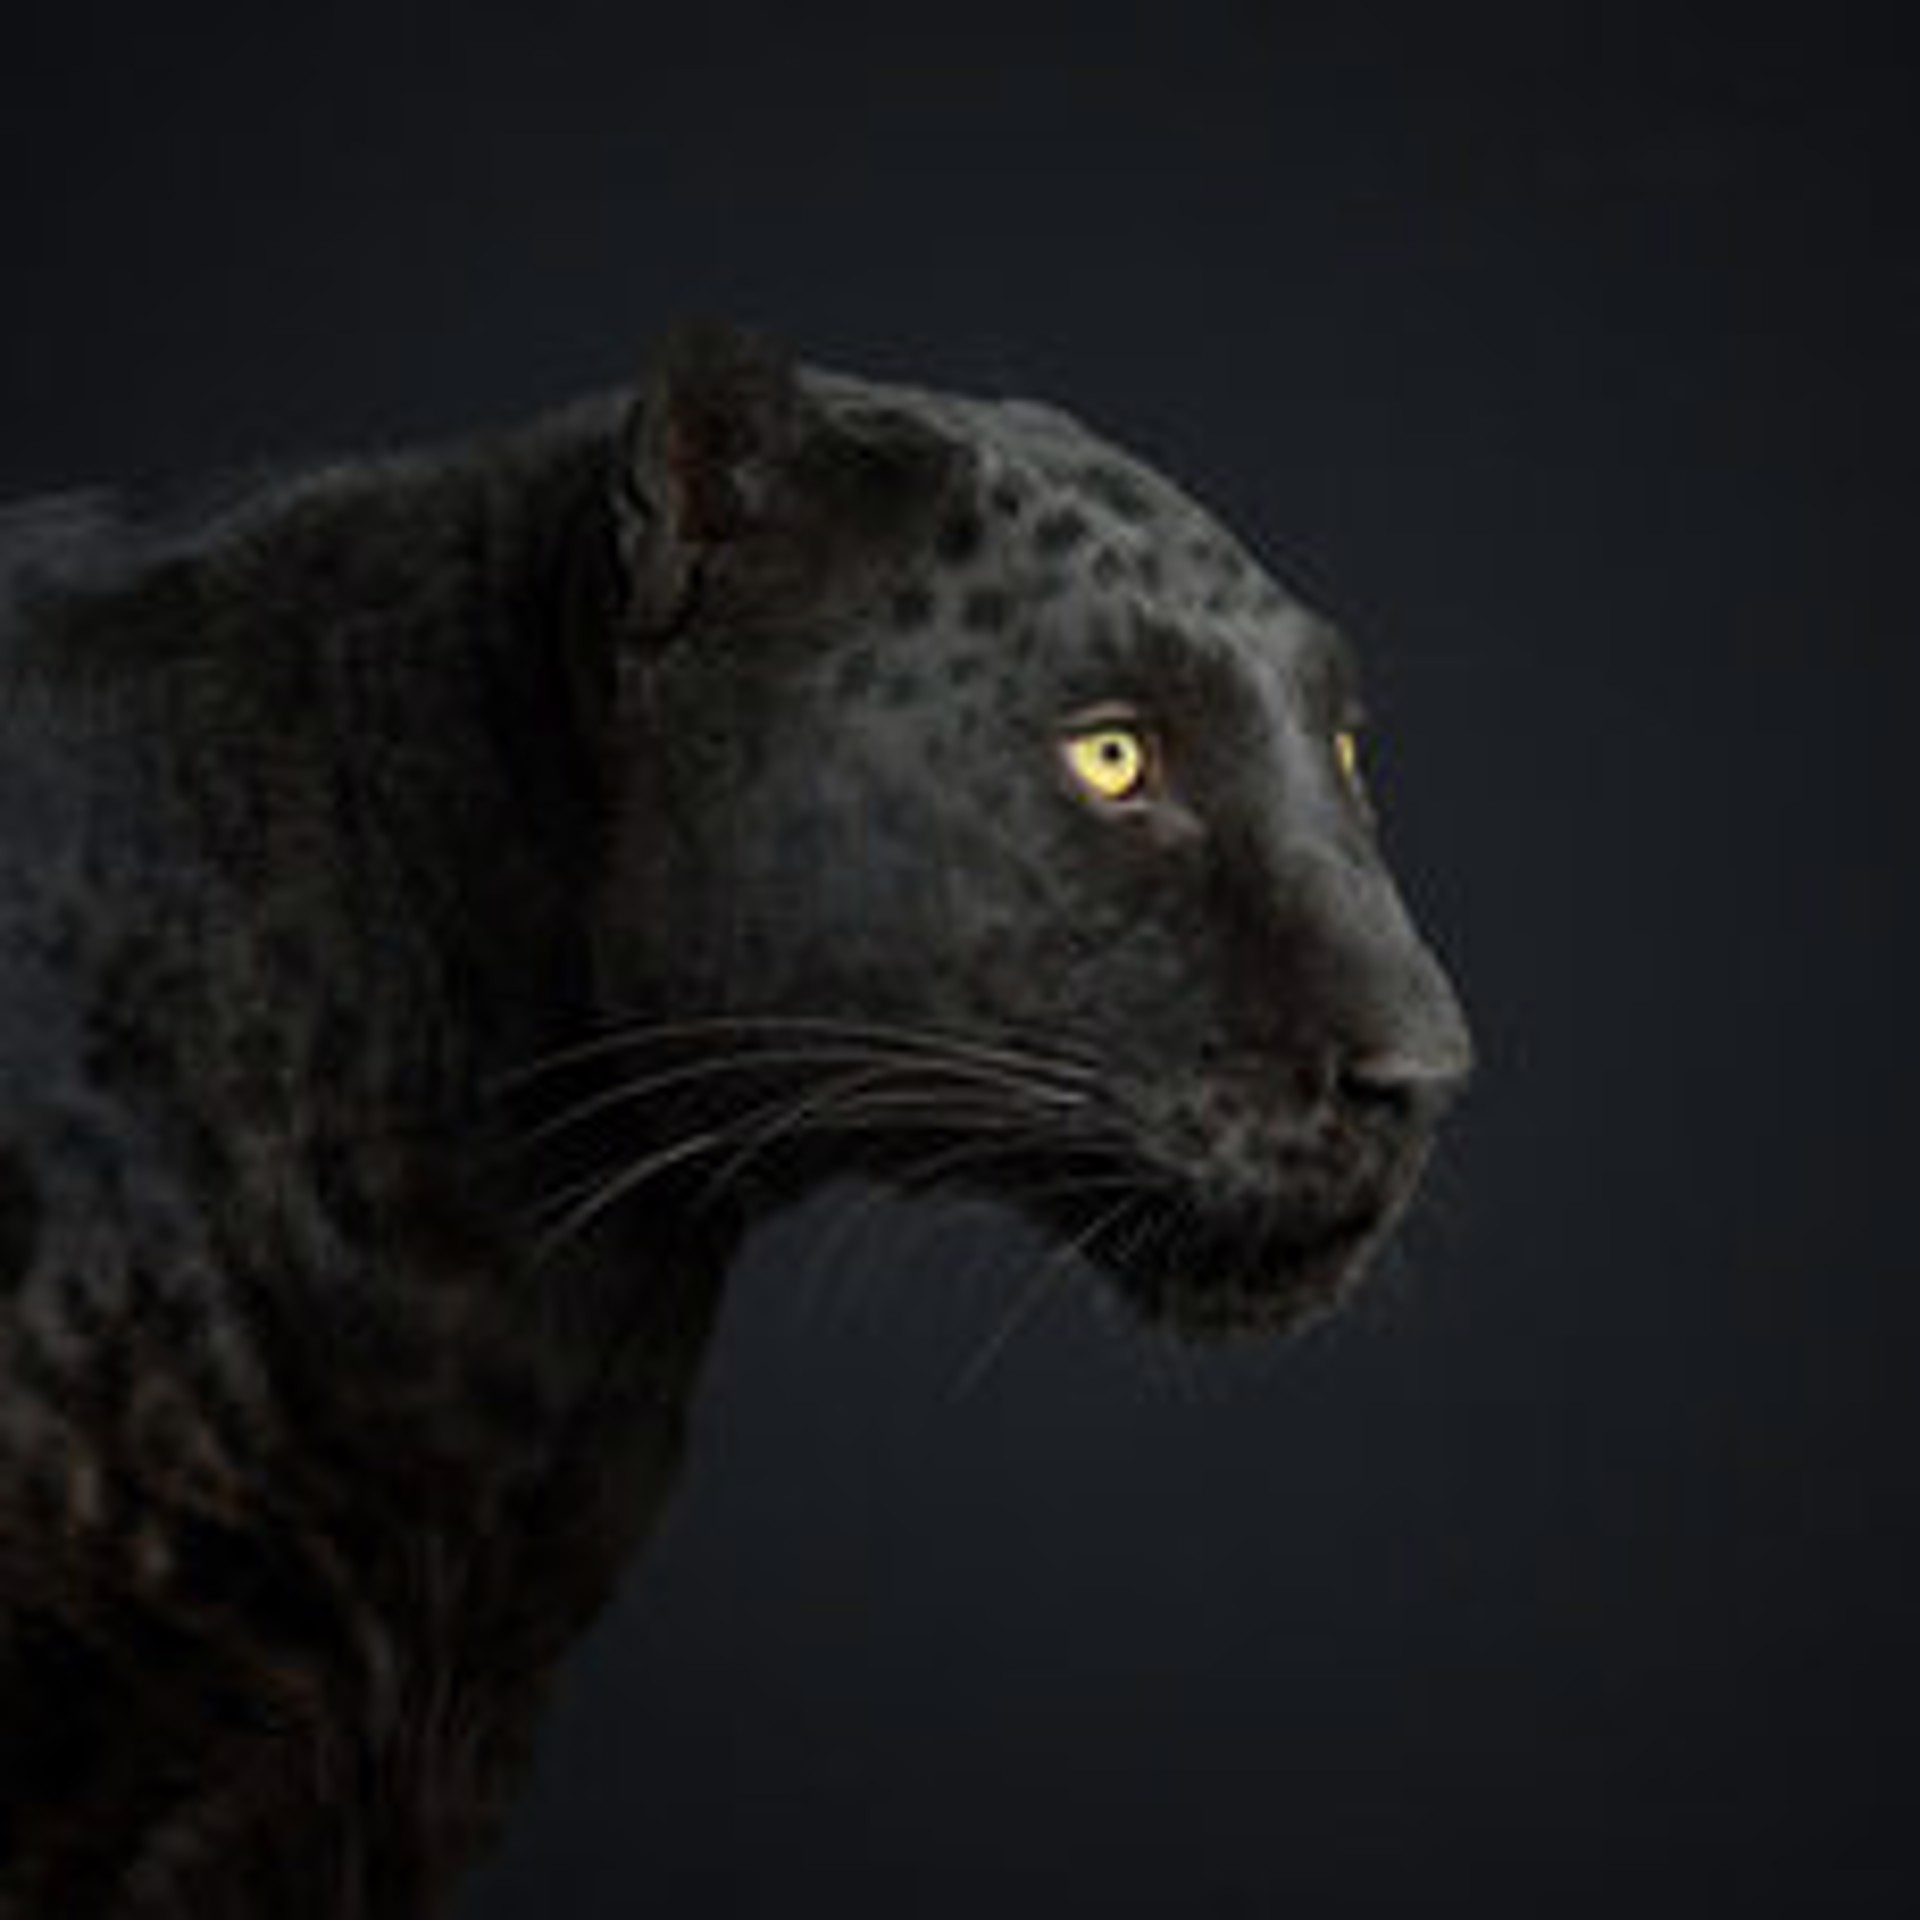 Black Leopard No. 1 by Randal Ford